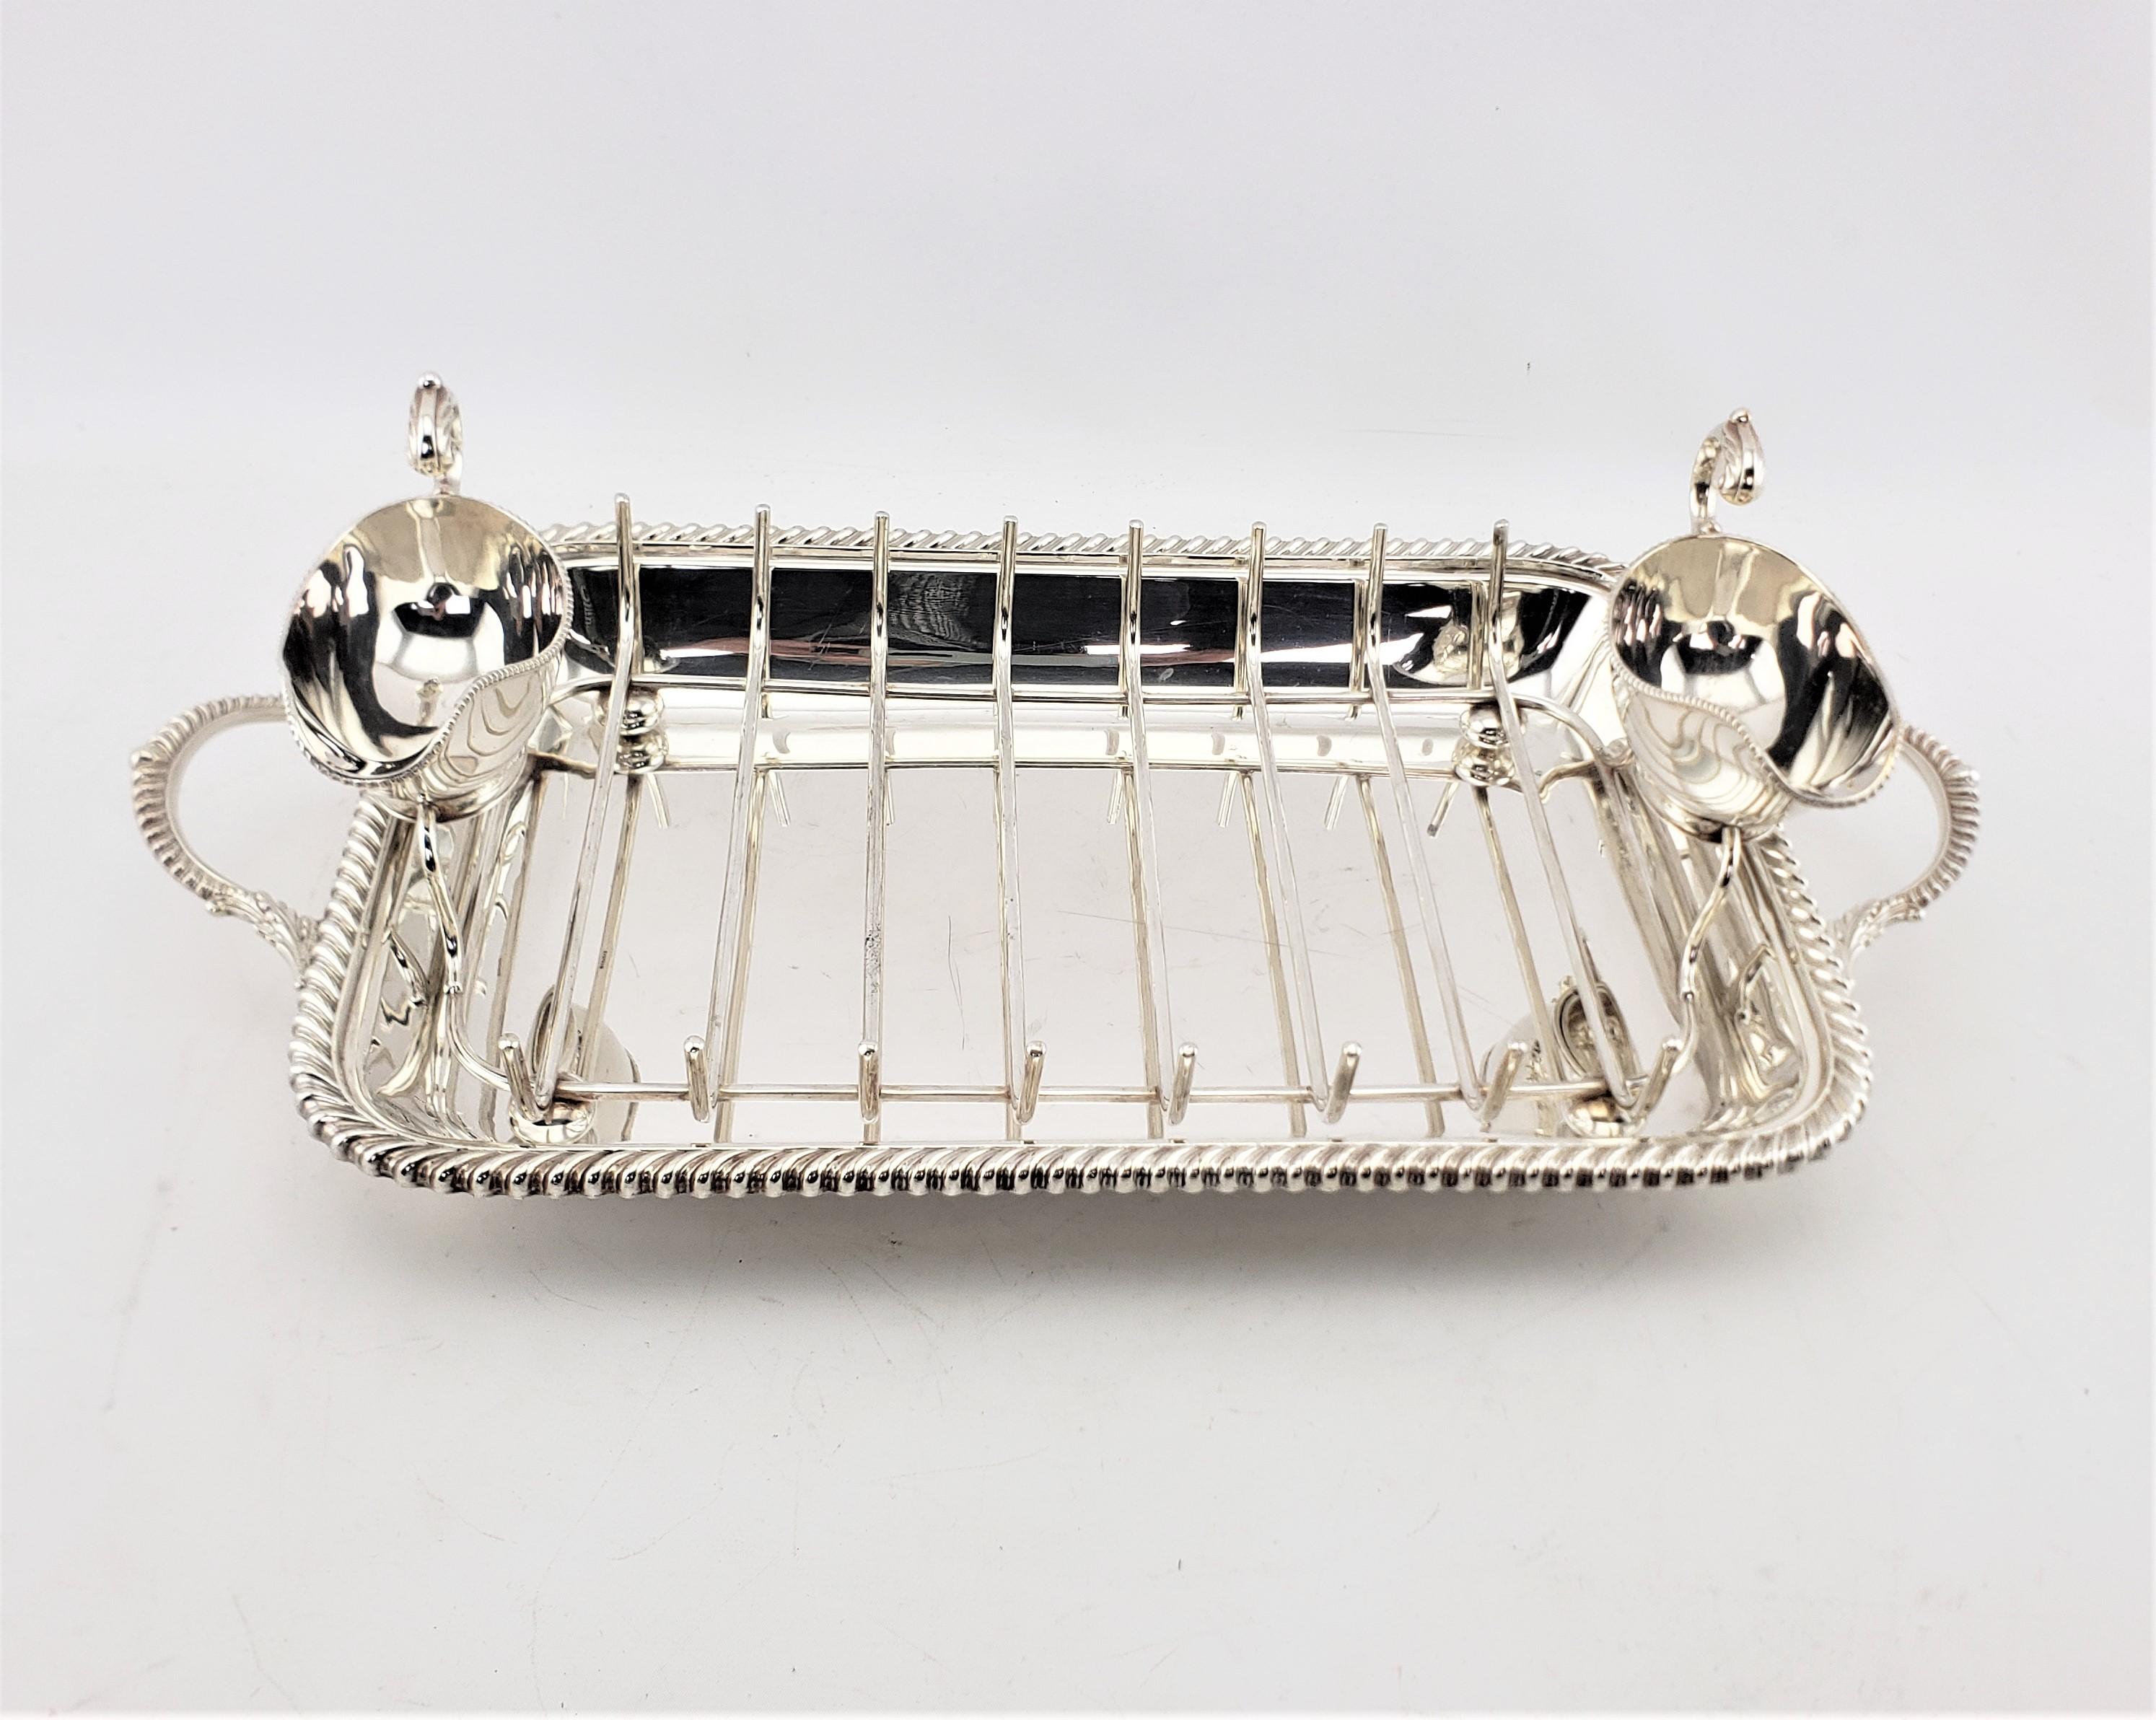 English Antique Birks Silver Plated Asparagus Server Set with Rope Accent Decoration For Sale